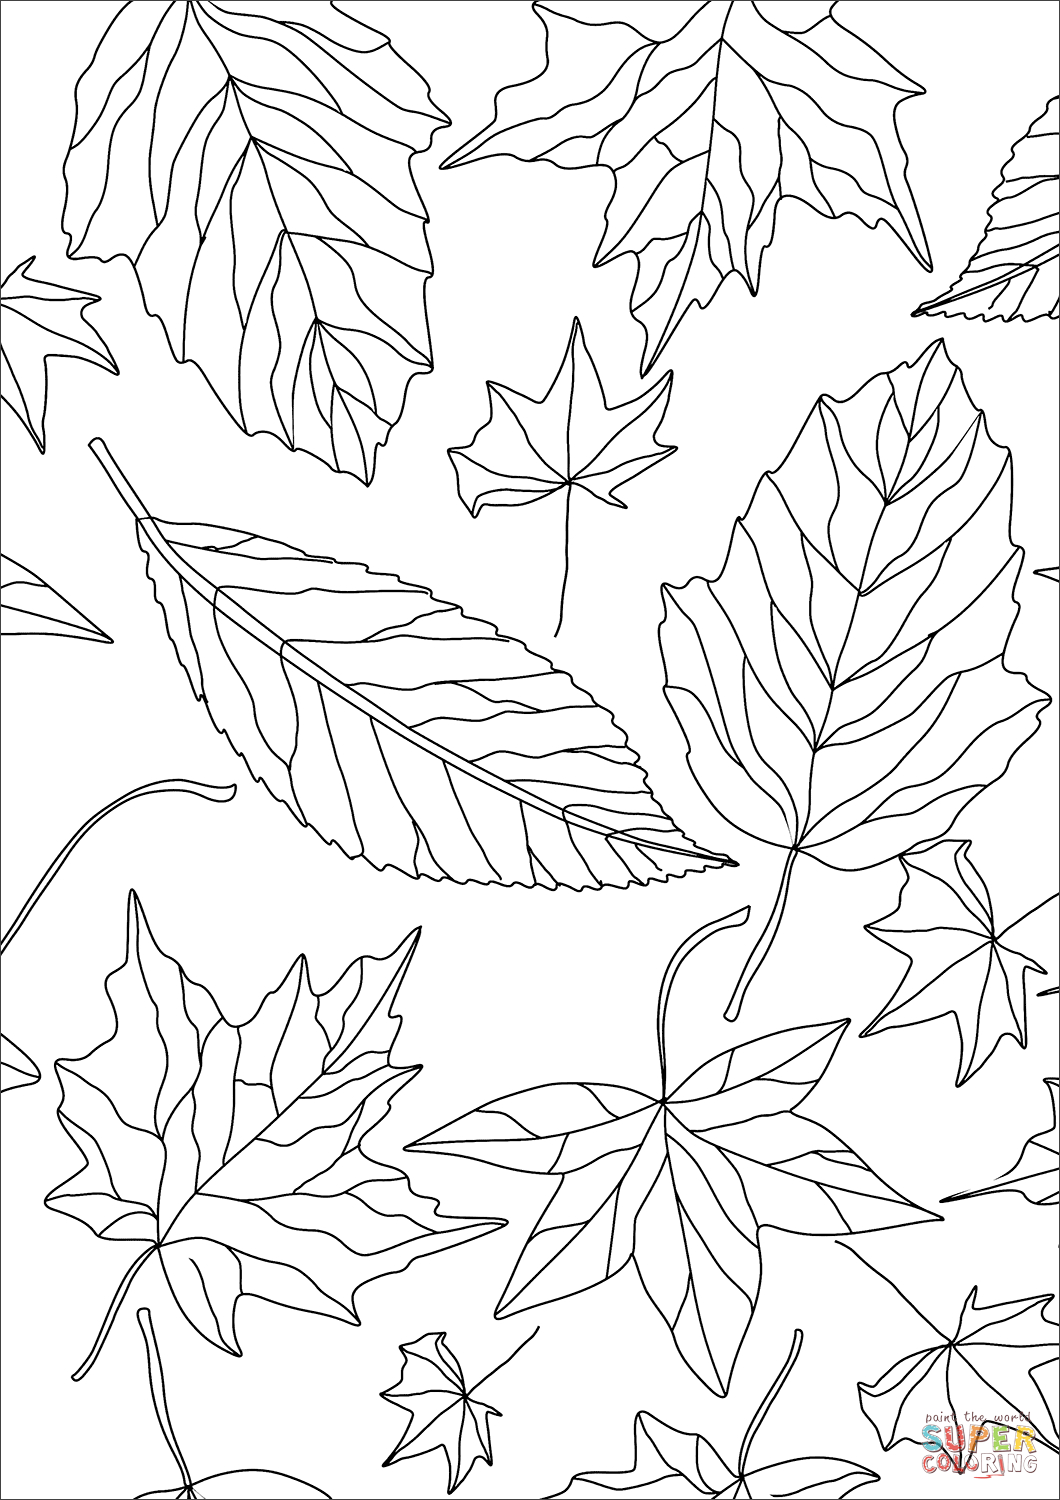 Free Coloring Pages Of Leaves Coloring Pages Autumn Leaves Pattern Coloring Page Free Printable